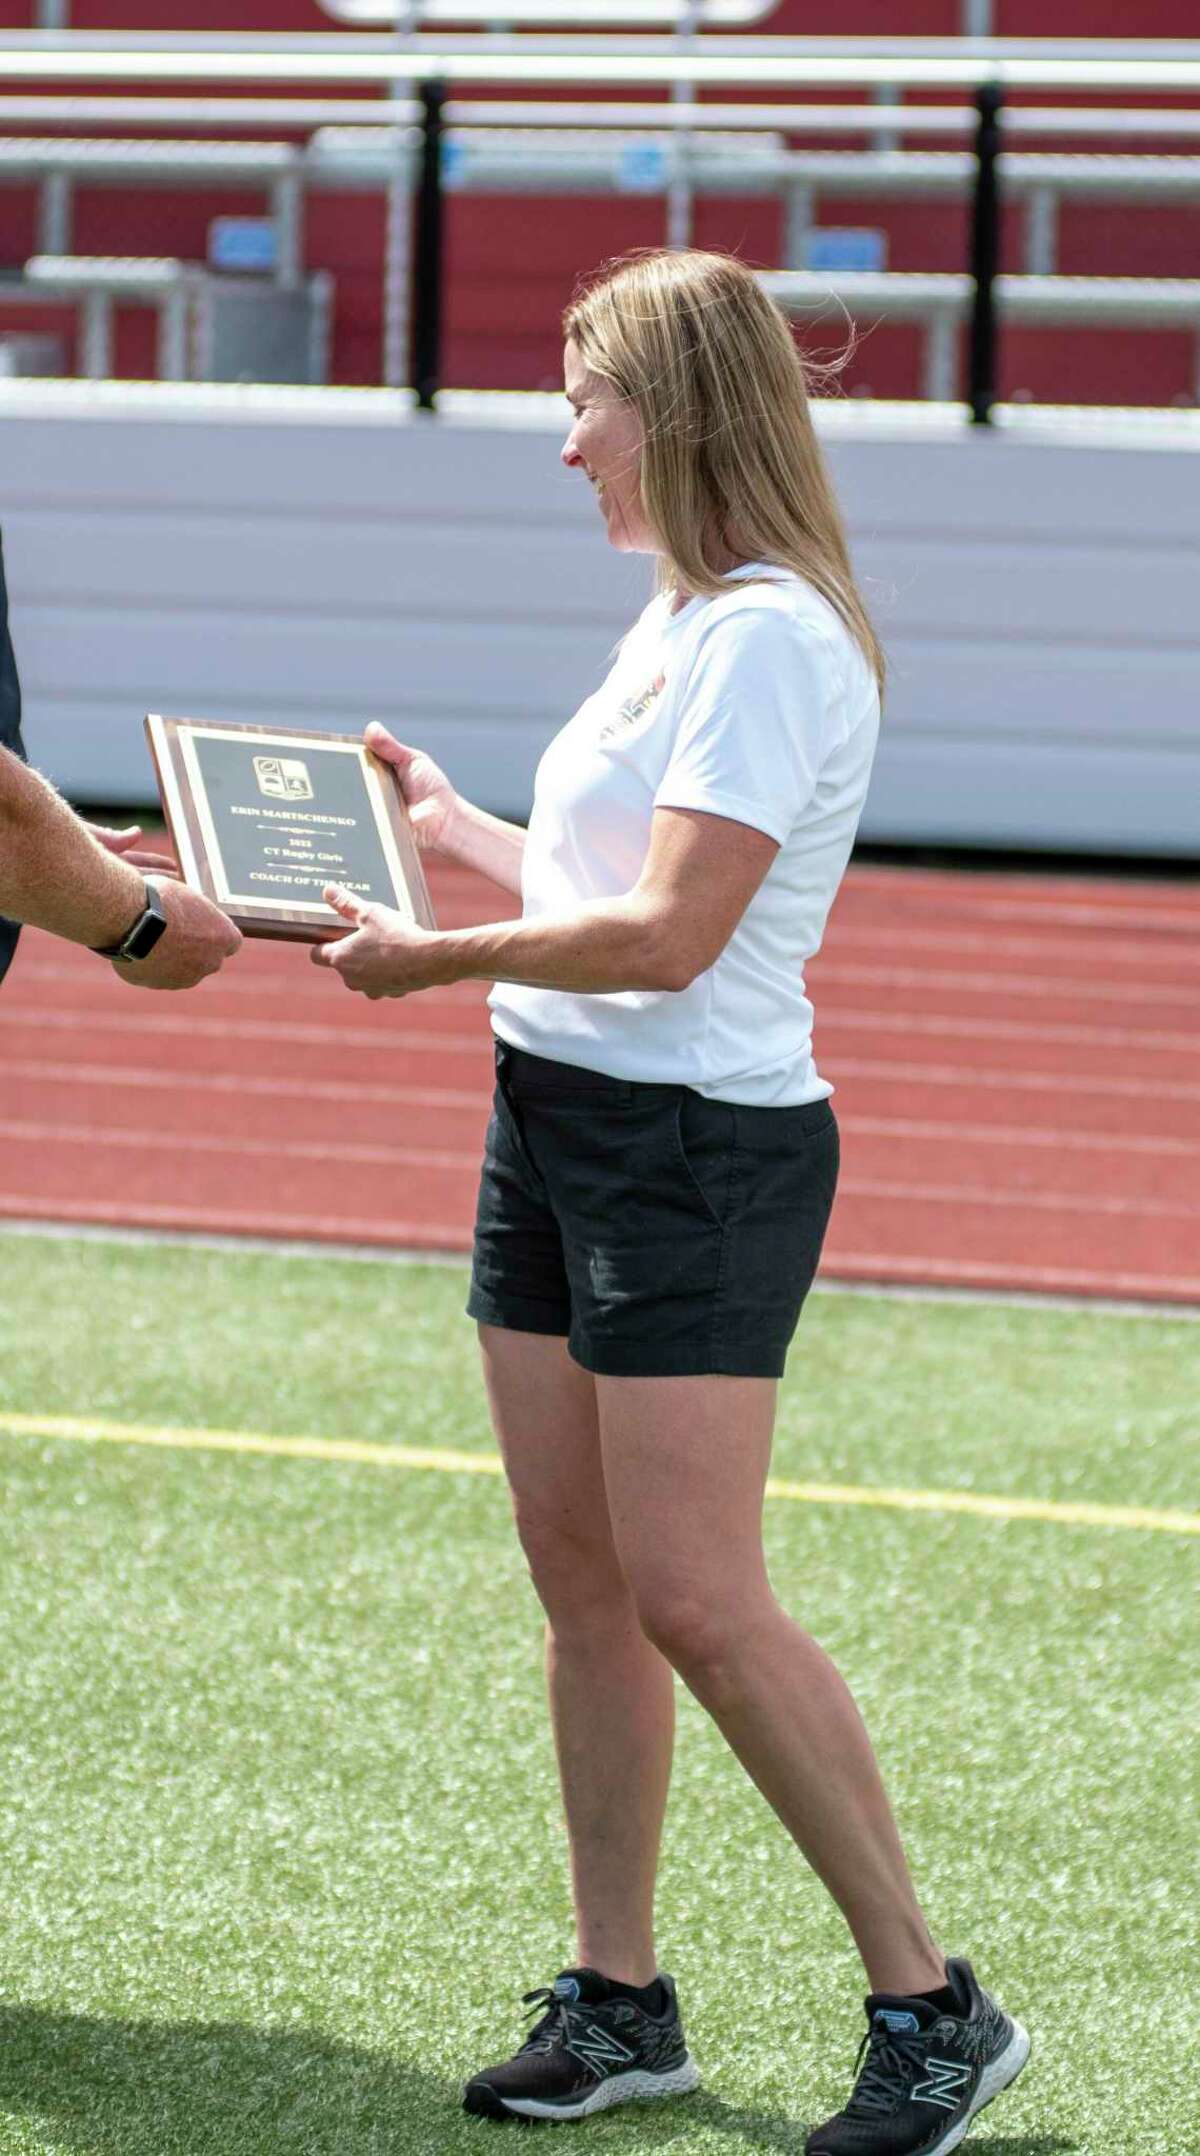 Greenwich girls’ rugby coach Erin Martschanko accepts the 2022 Girls Rugby Coach of the Year plaque at Cardinal Stadium on Tuesday, July 26, 2022.